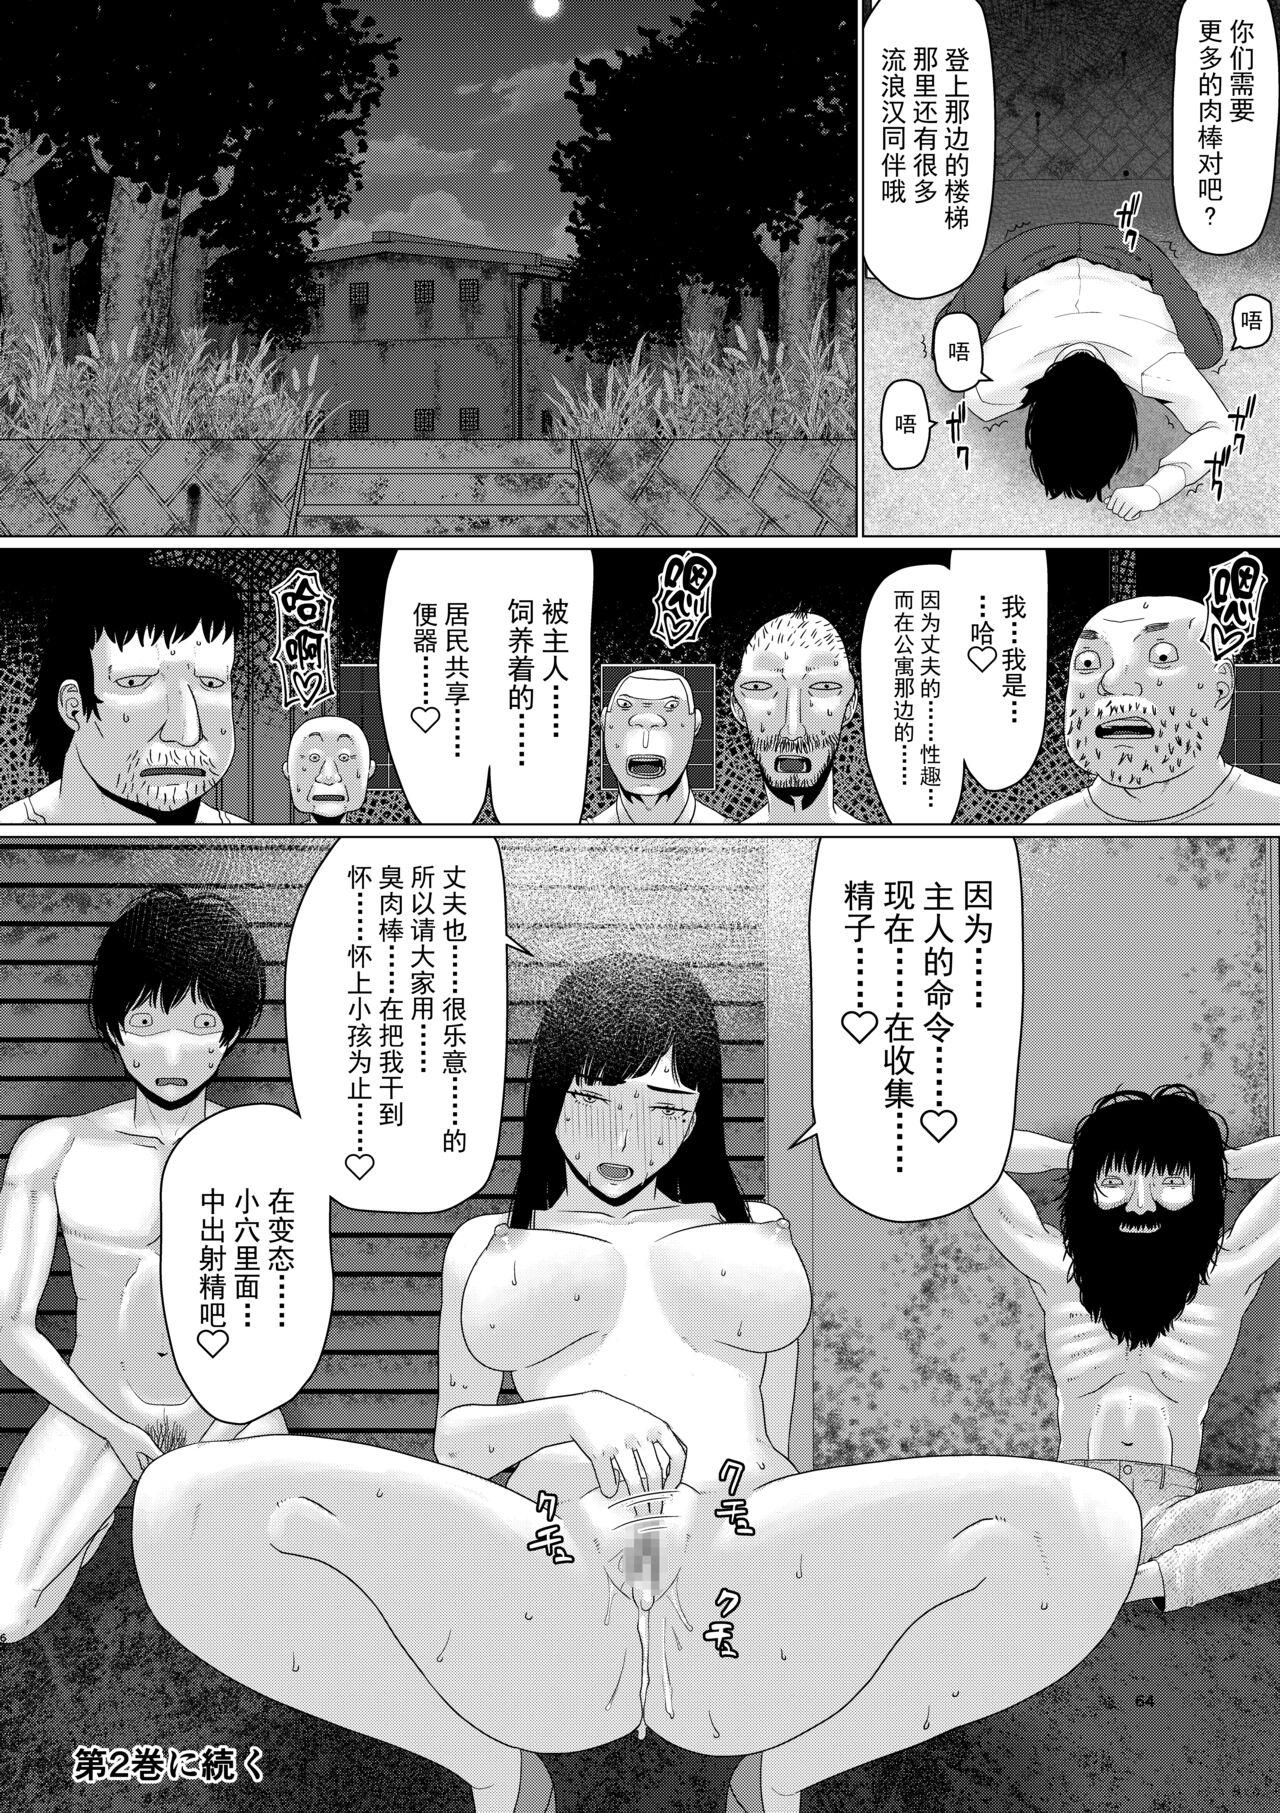 (Dōjinshi) Chieri can't lose!3 -Perverted toilet wife who fertilizes anyone's sperm with her husband's approval- Volume 1 (Original) [Chinese][超勇漢化組] 64